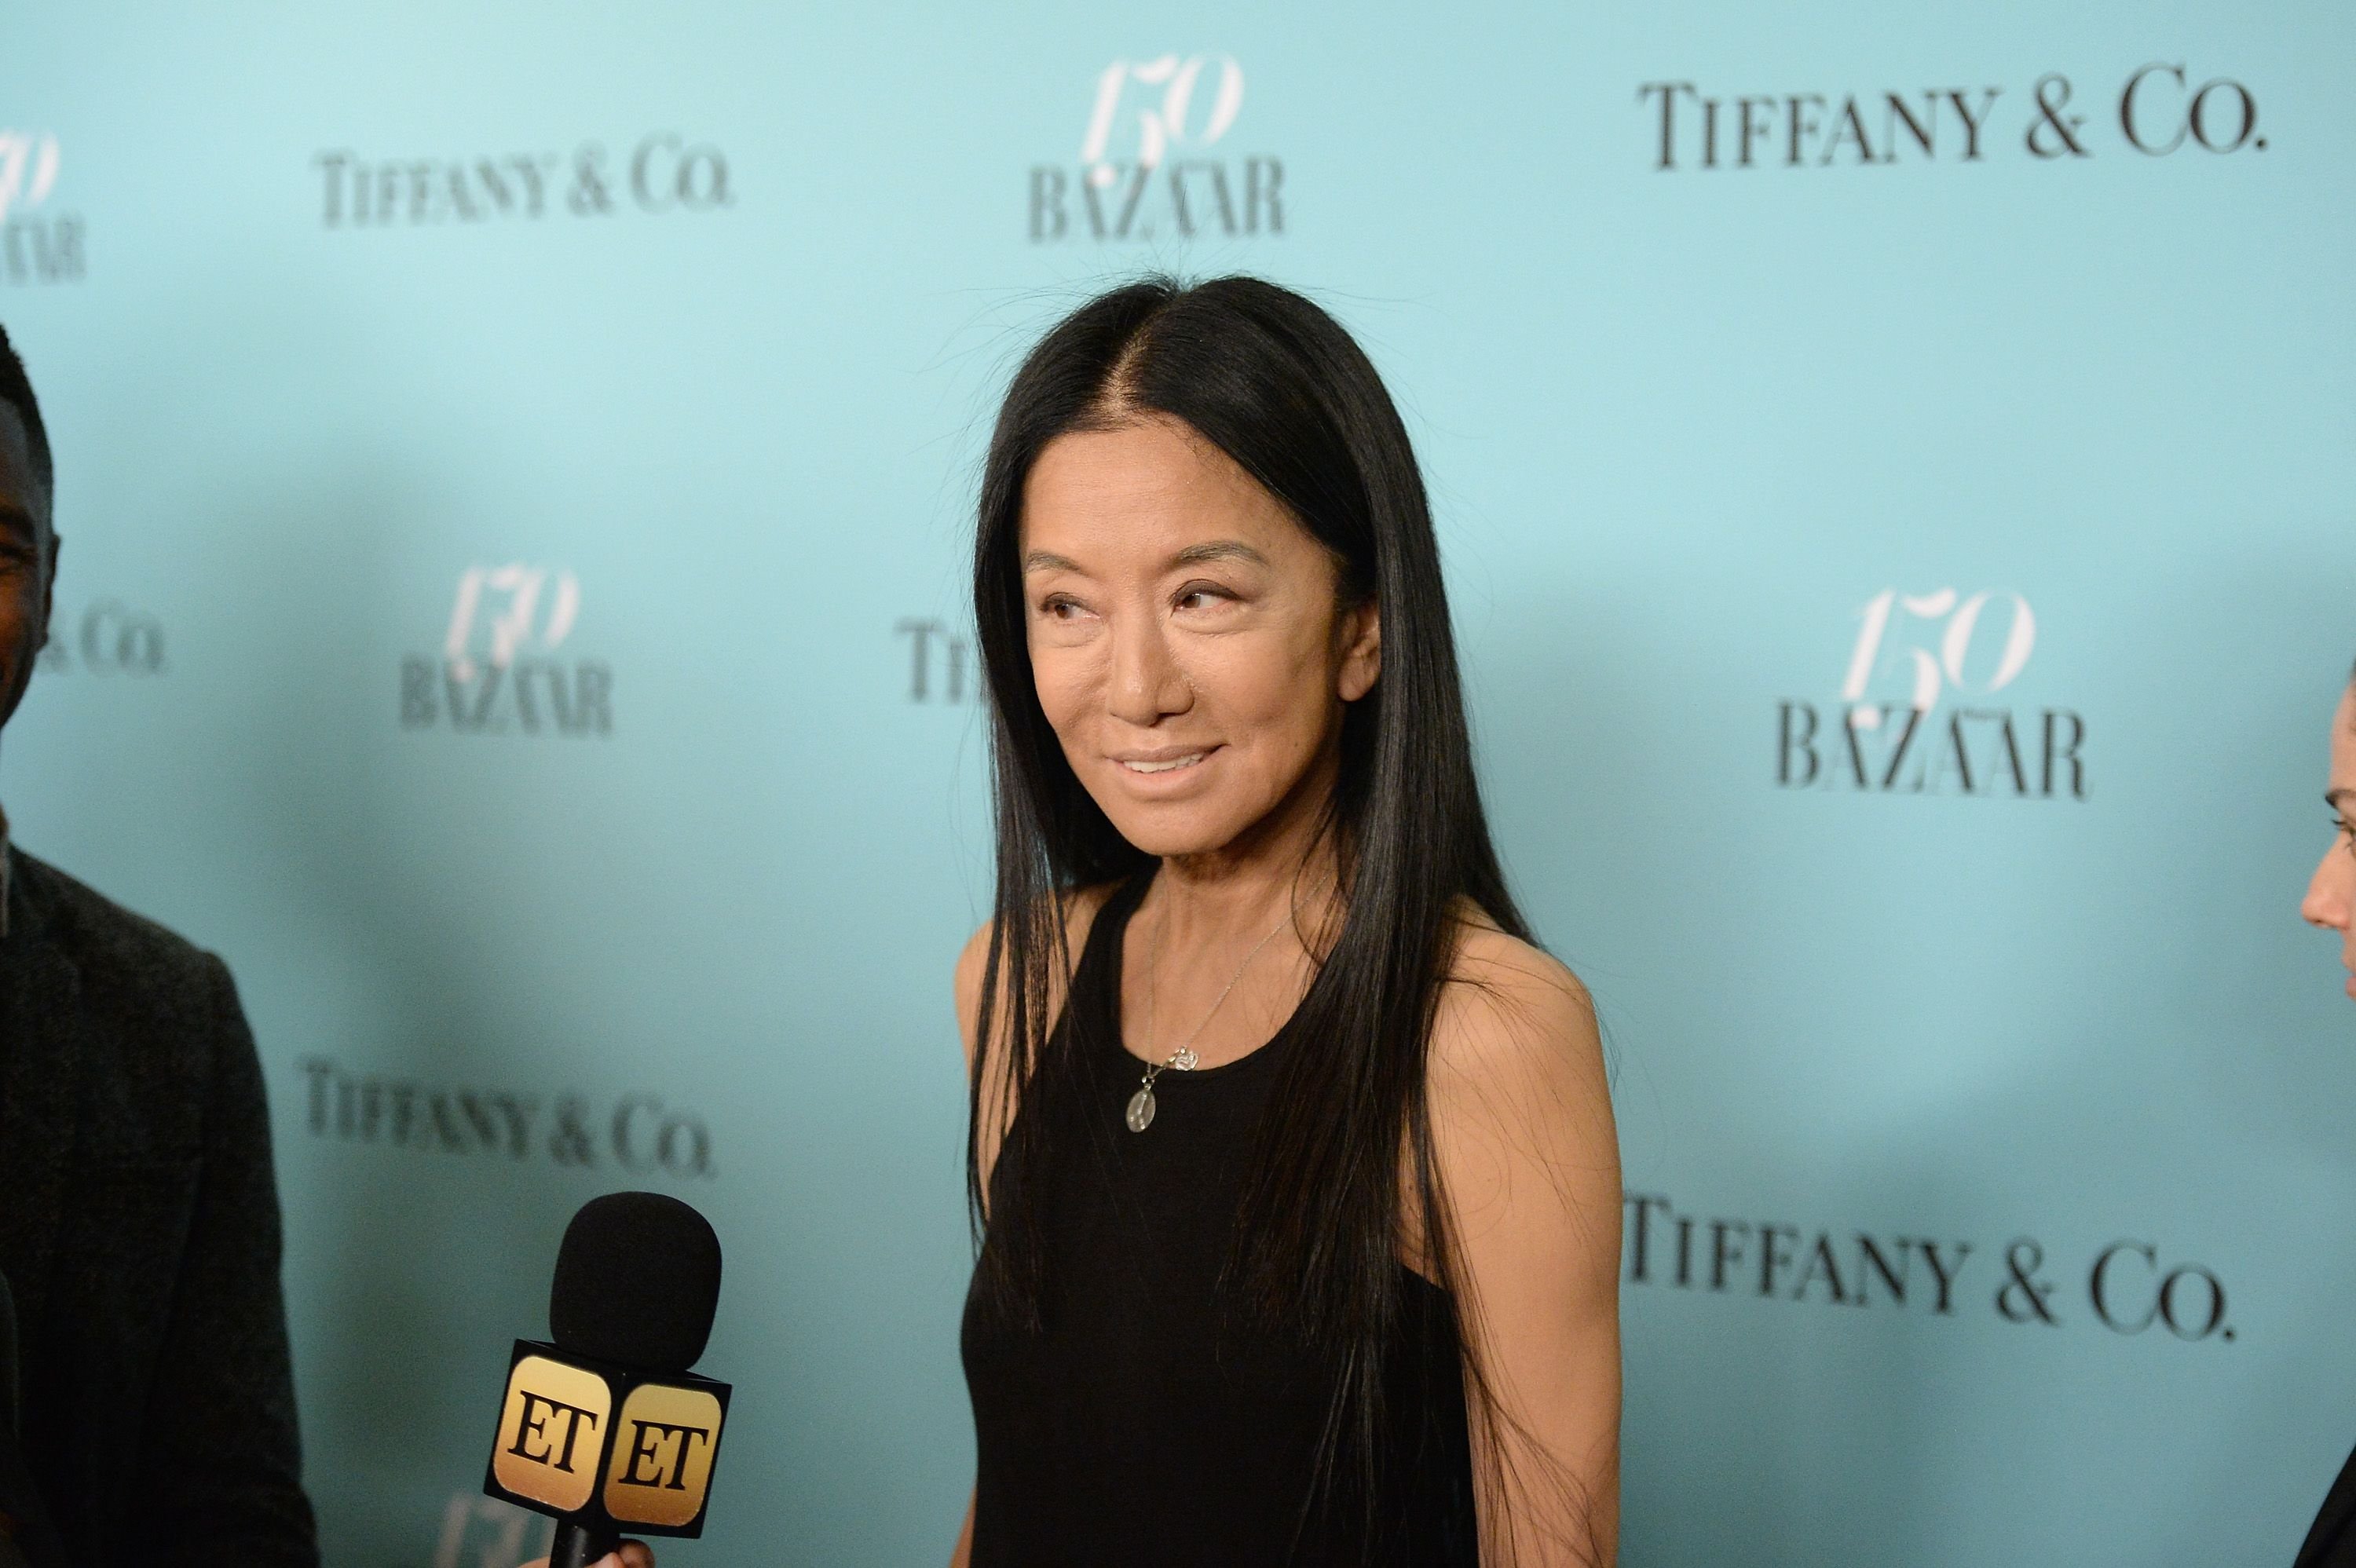 Designer Vera Wang attends Harper's BAZAAR 150th Anniversary Event presented with Tiffany & Co at The Rainbow Room on April 19, 2017 in New York City. | Photo: Getty Images